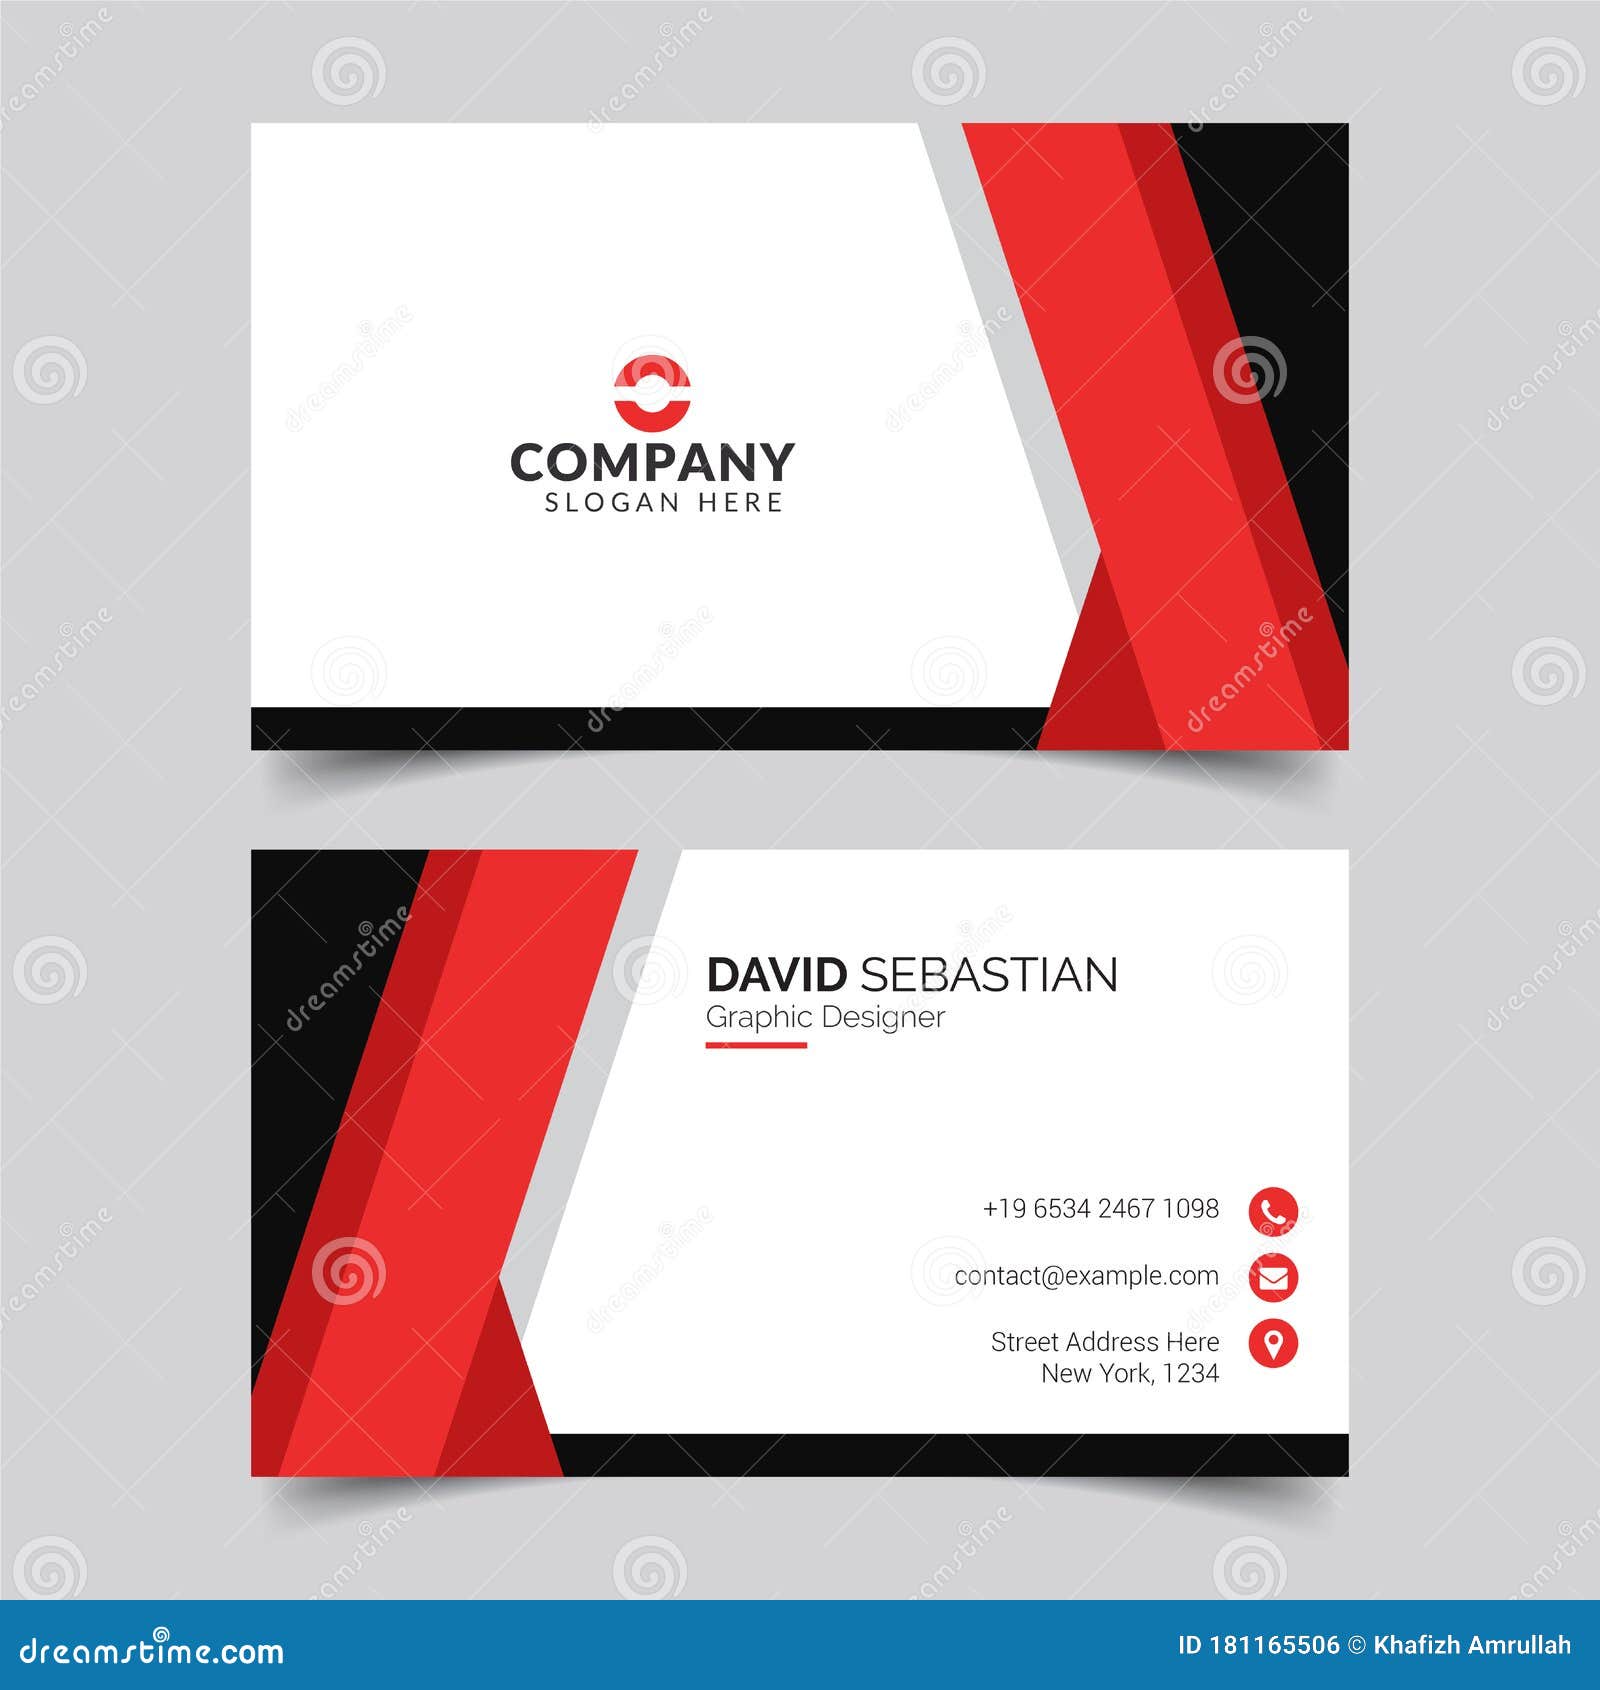 Modern and Clean Business Card Design Template. Minimal Corporate With Office Max Business Card Template